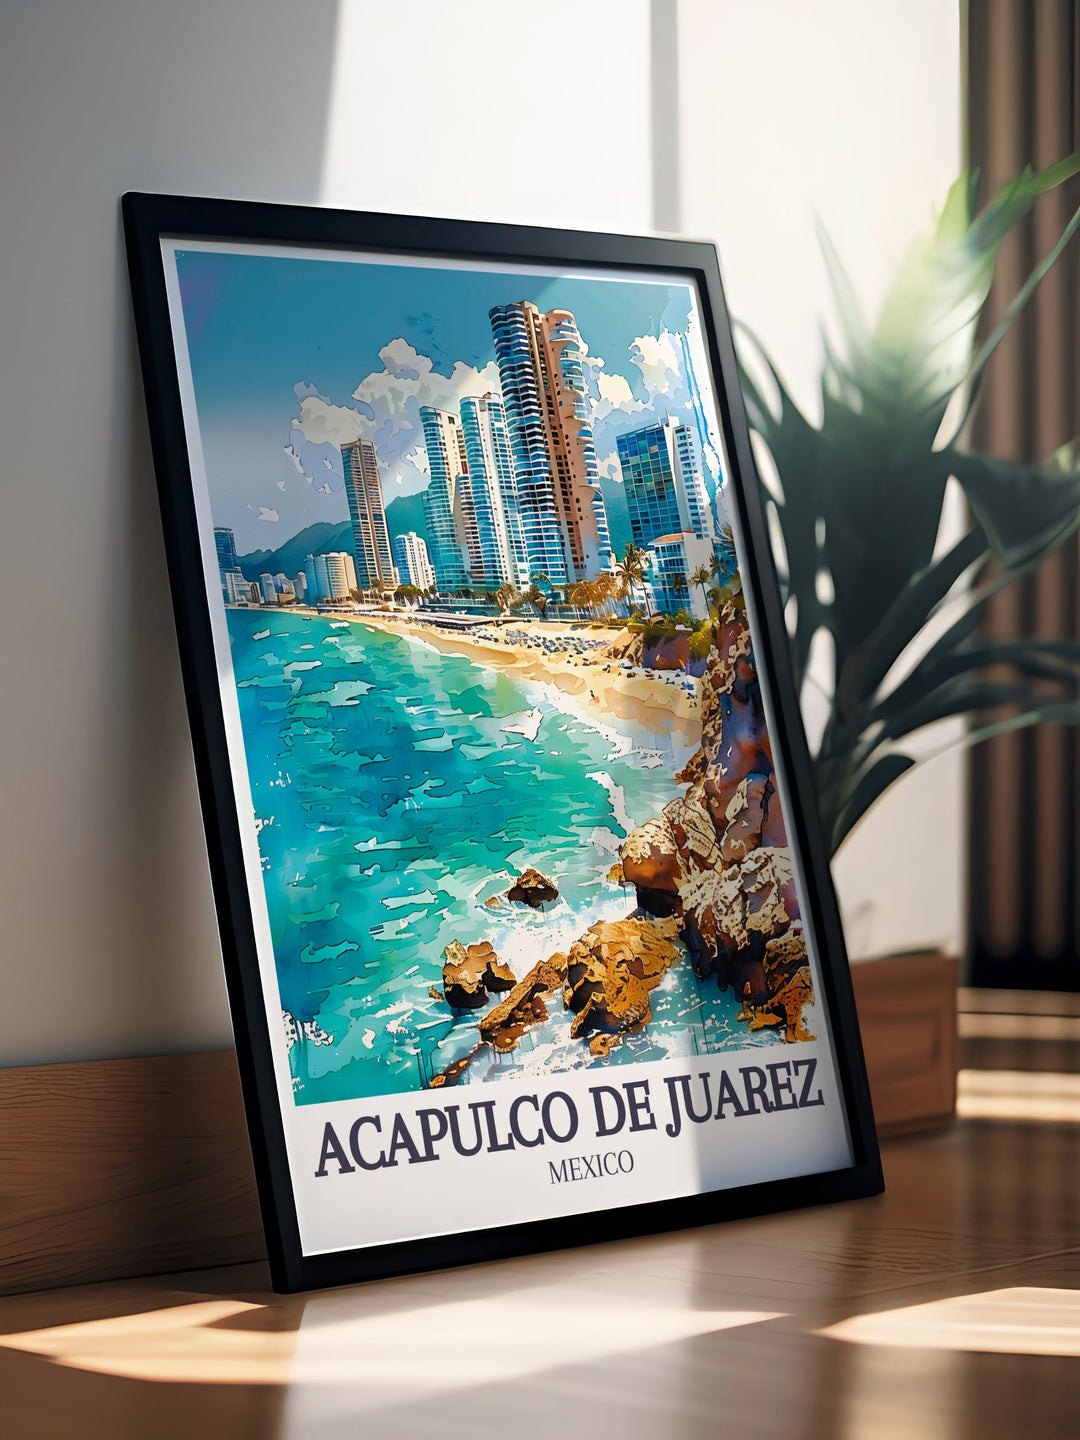 Playa Condesas golden sands and vibrant atmosphere are beautifully depicted in this poster, inviting viewers to explore the lively beach scene of Acapulco de Juárez.